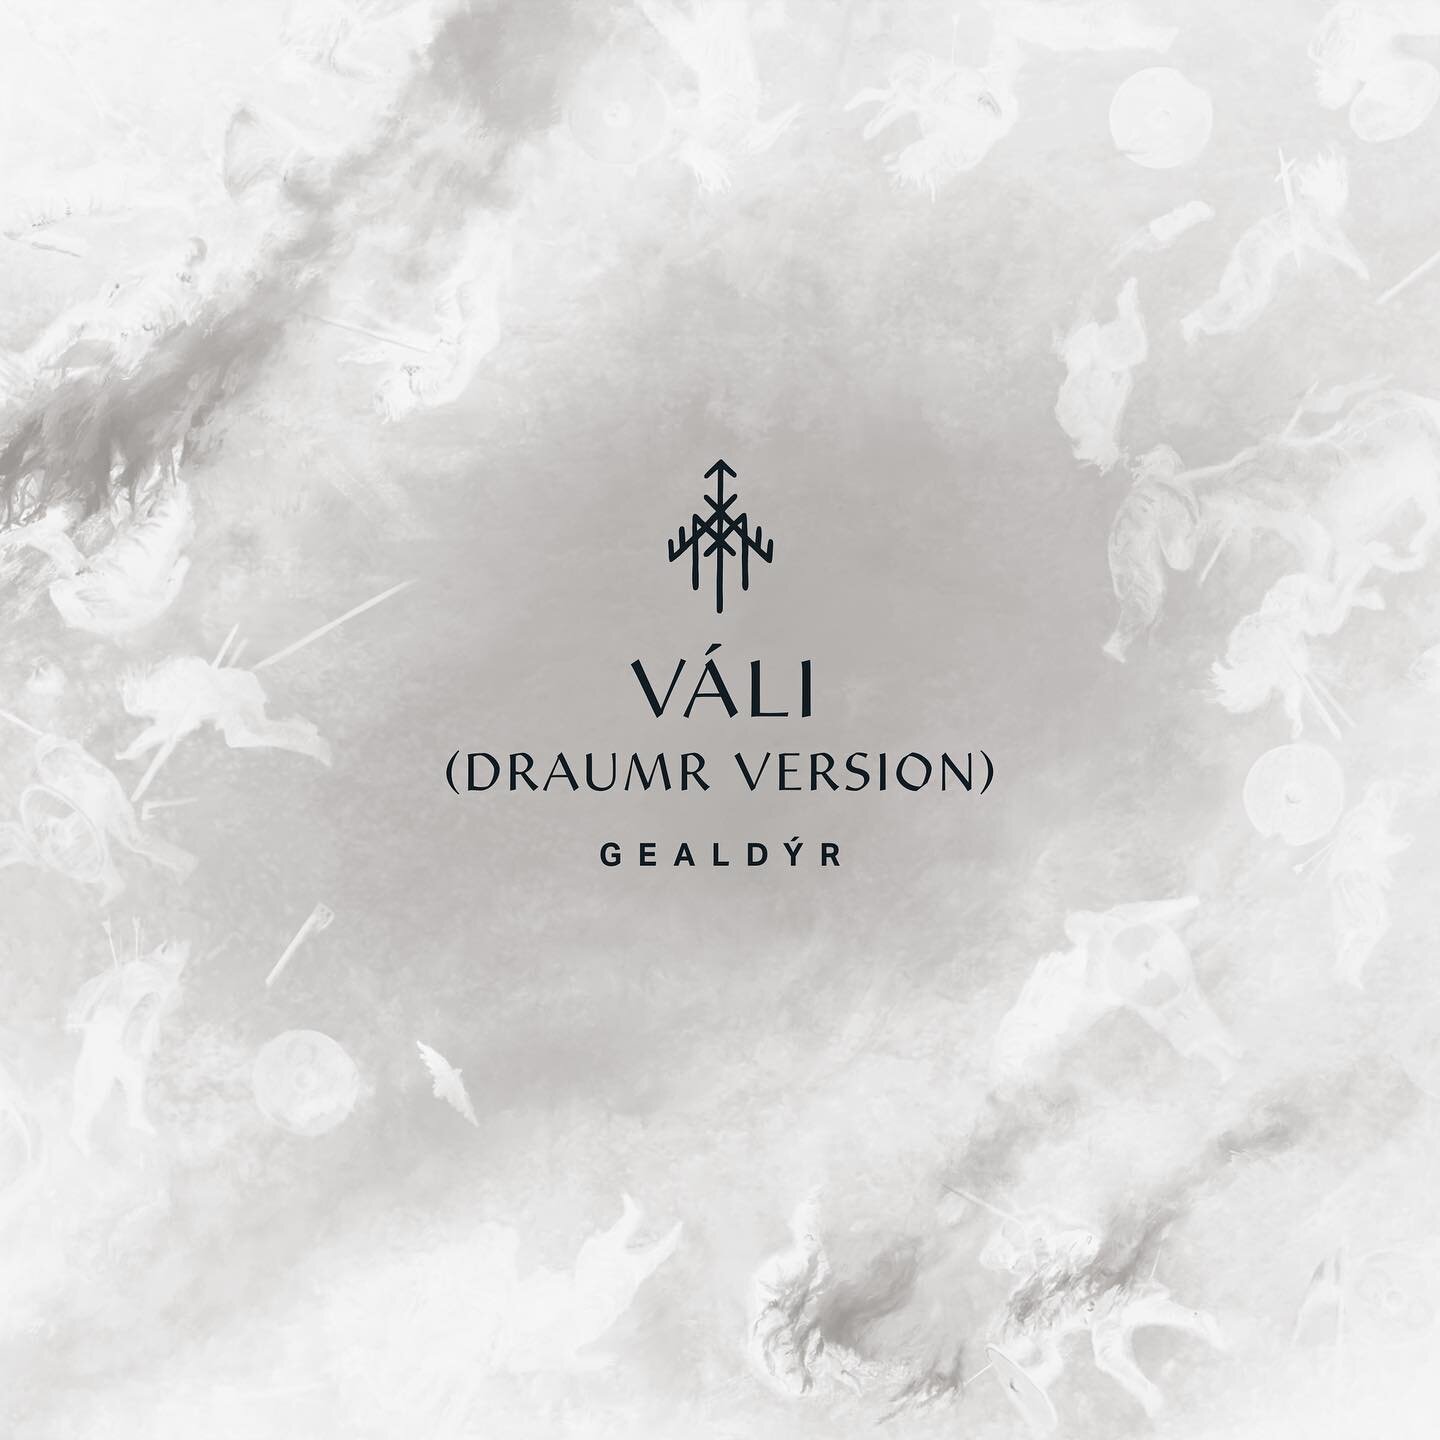 V&aacute;li (Draumr Version) is now available on all digital platforms! The Draumr version, with &lsquo;Draumr&rsquo; meaning &lsquo;Dream&rsquo; in Old Norse, is created to guide you to a relaxed state of mind and being for sleep or meditation. Plea